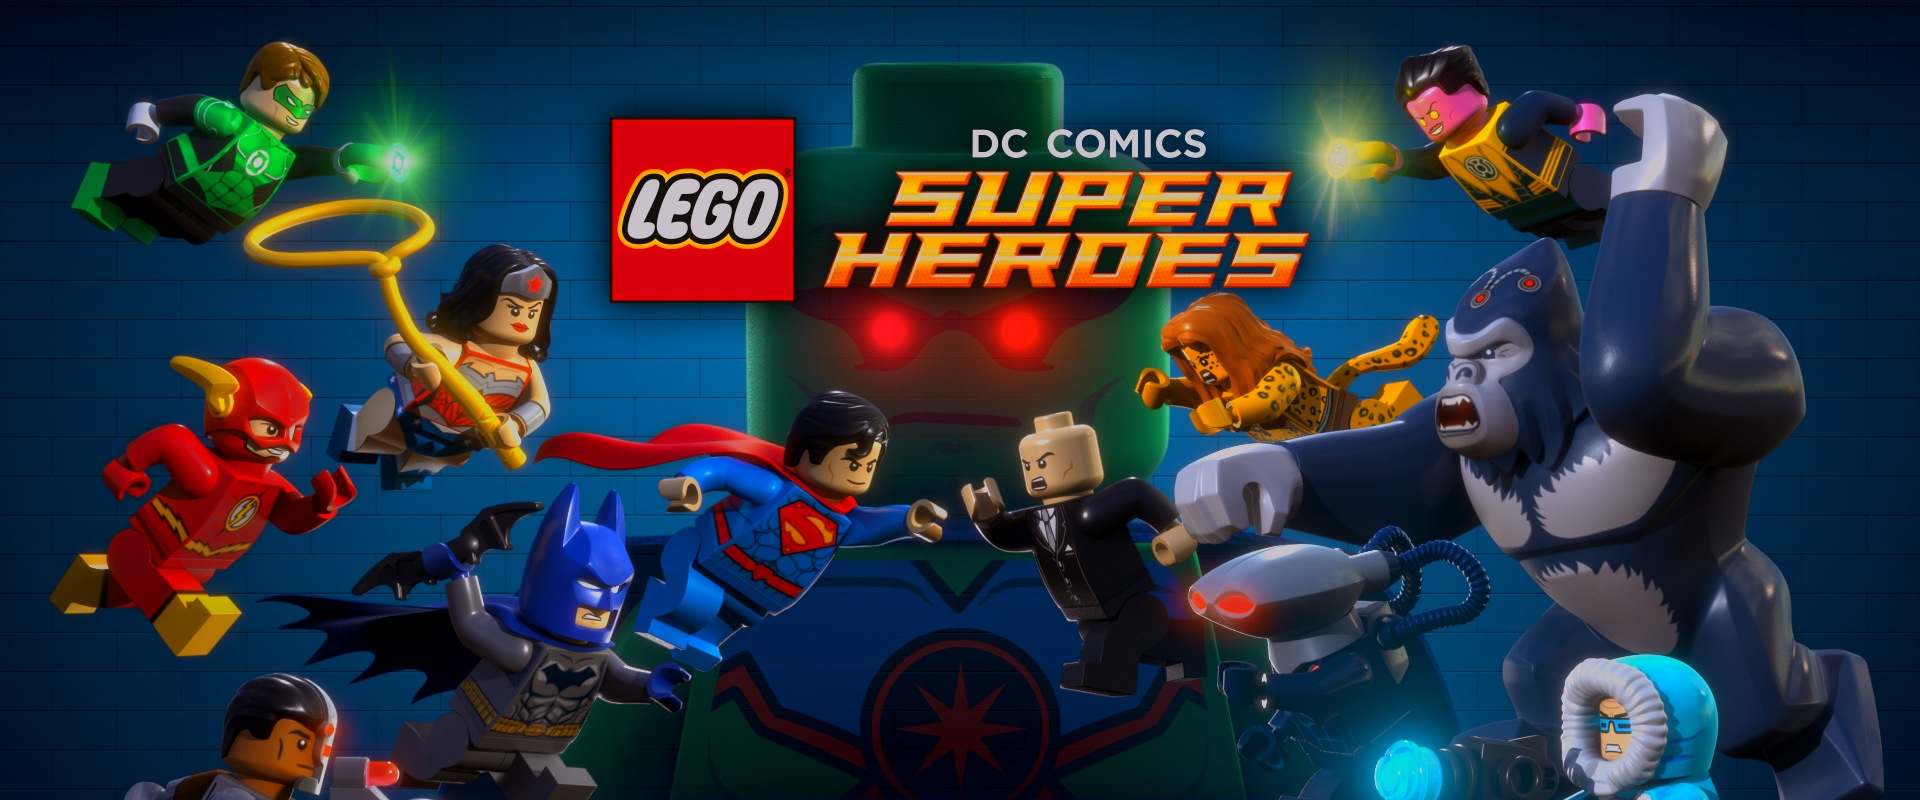 LEGO DC Super Heroes: Justice League - Attack of the Legion of Doom! background 1